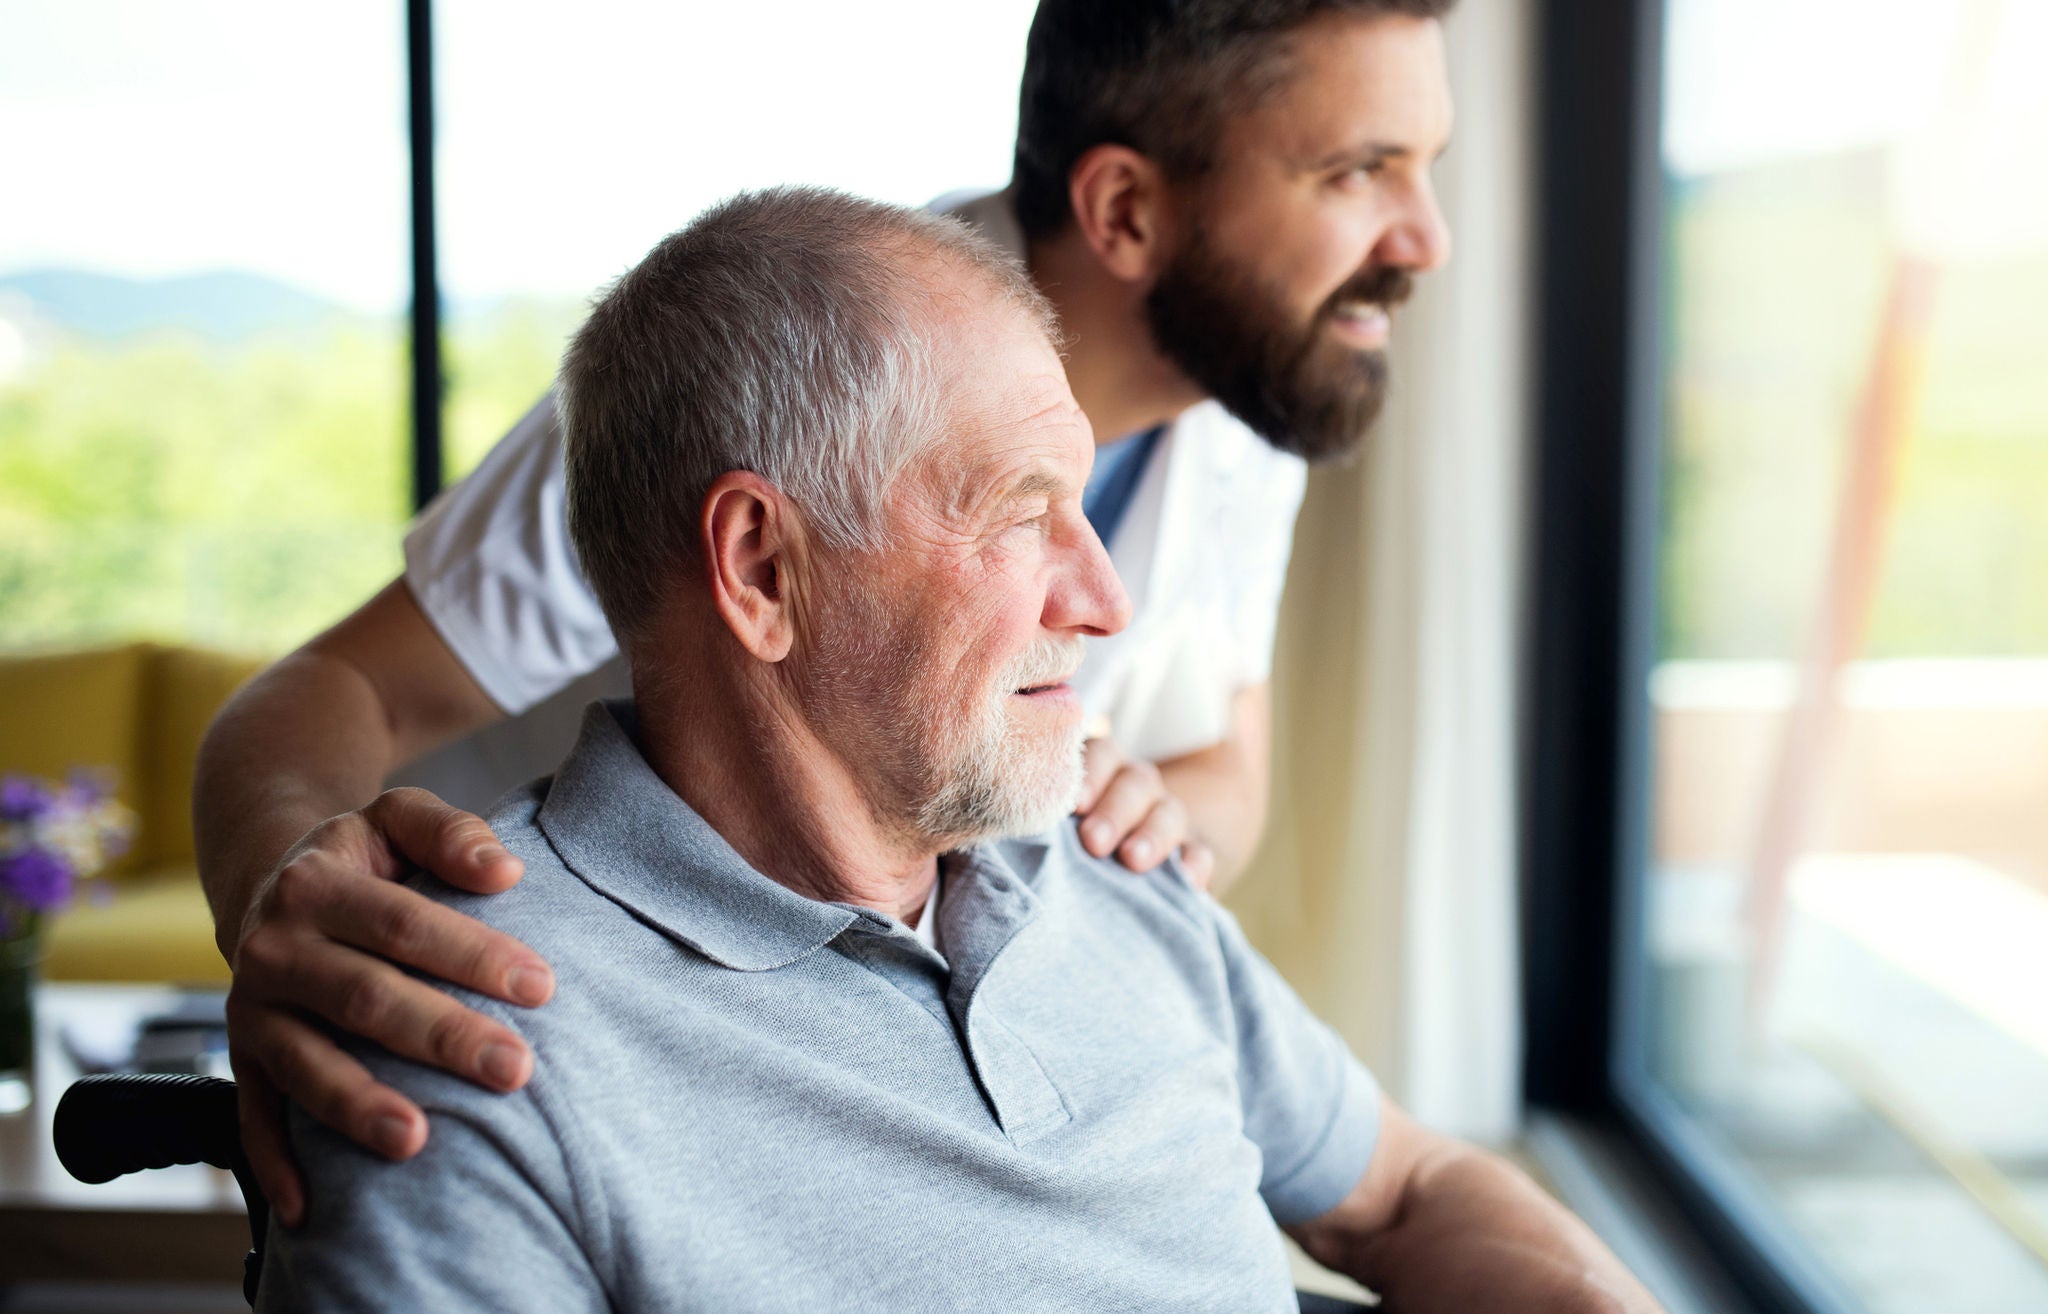 A mature man caregiver with stethoscope and old patient looking out through window.